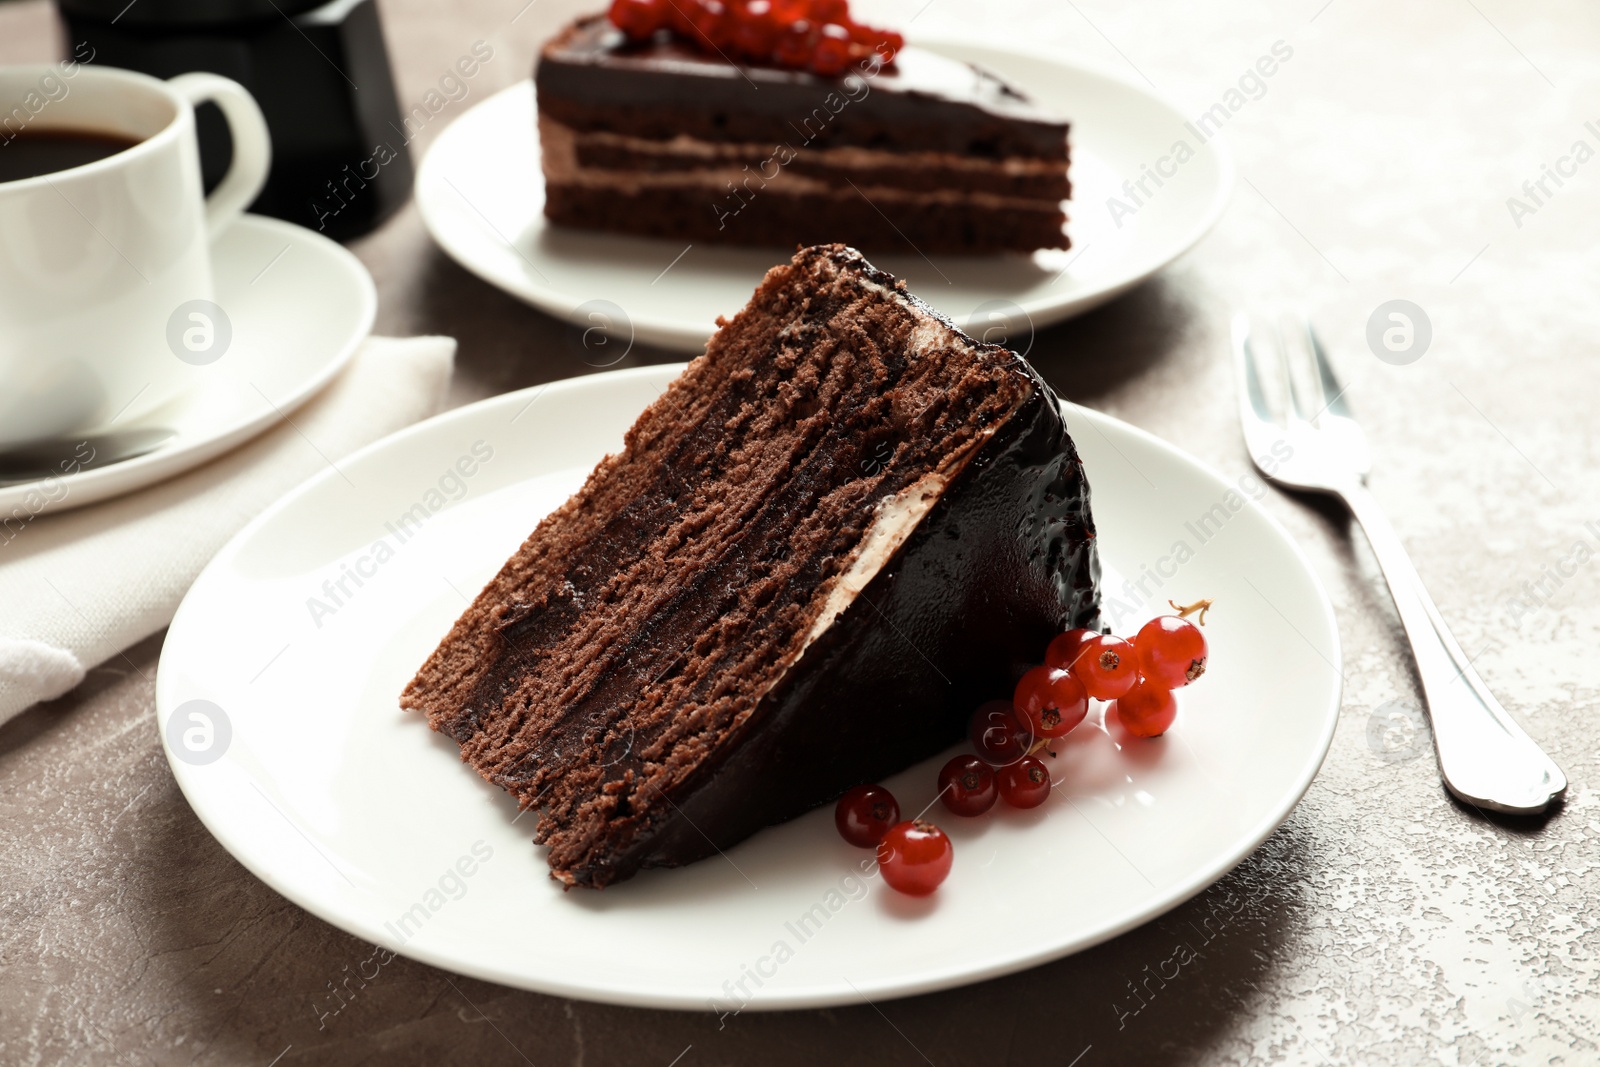 Photo of Slice of tasty chocolate cake with berries served on table